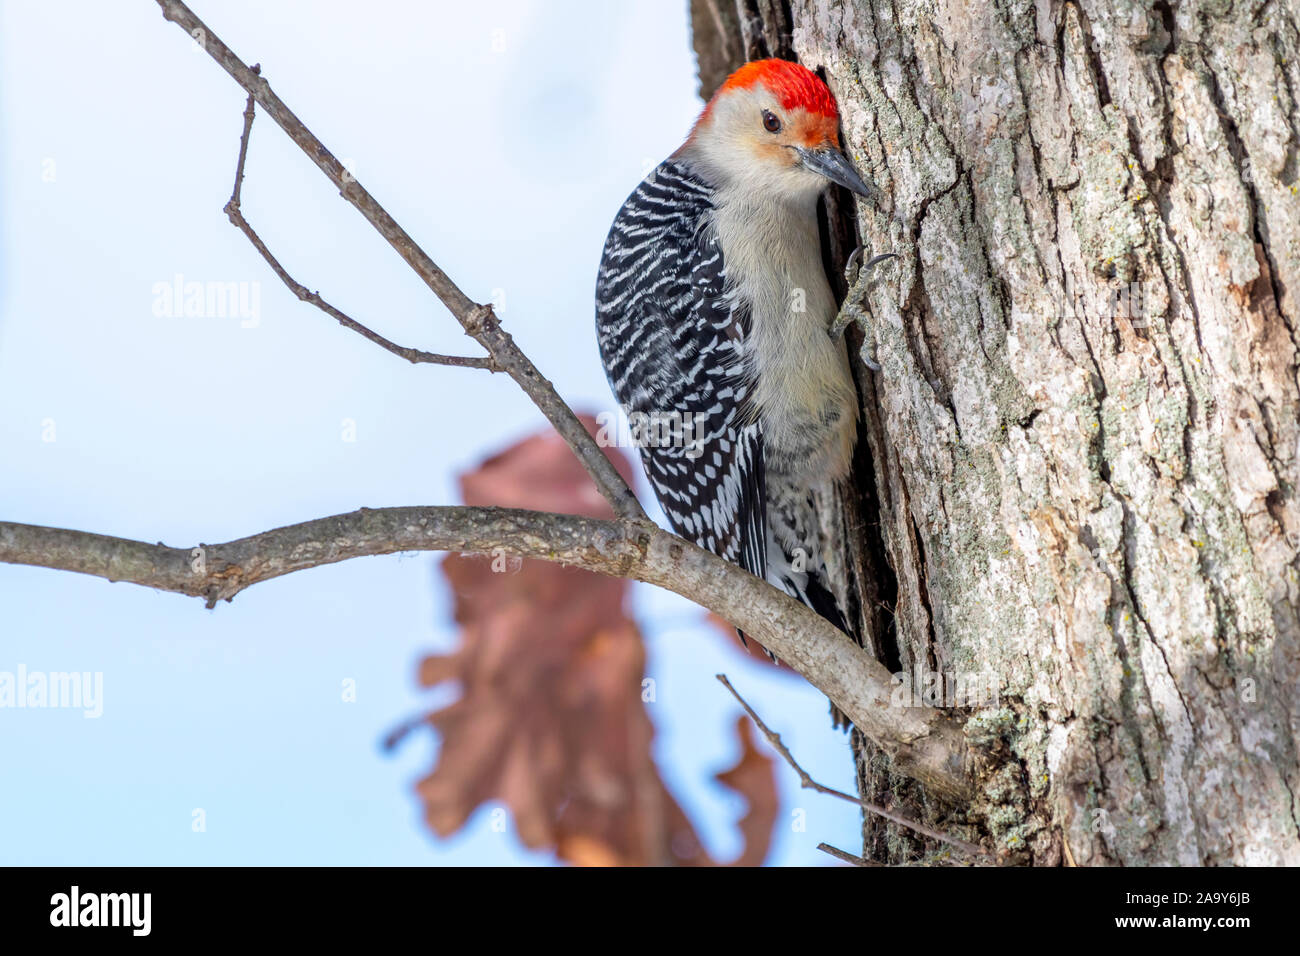 A male Red-bellied Woodpecker (Melanerpes carolinus) perched on a tree in the winter. Stock Photo